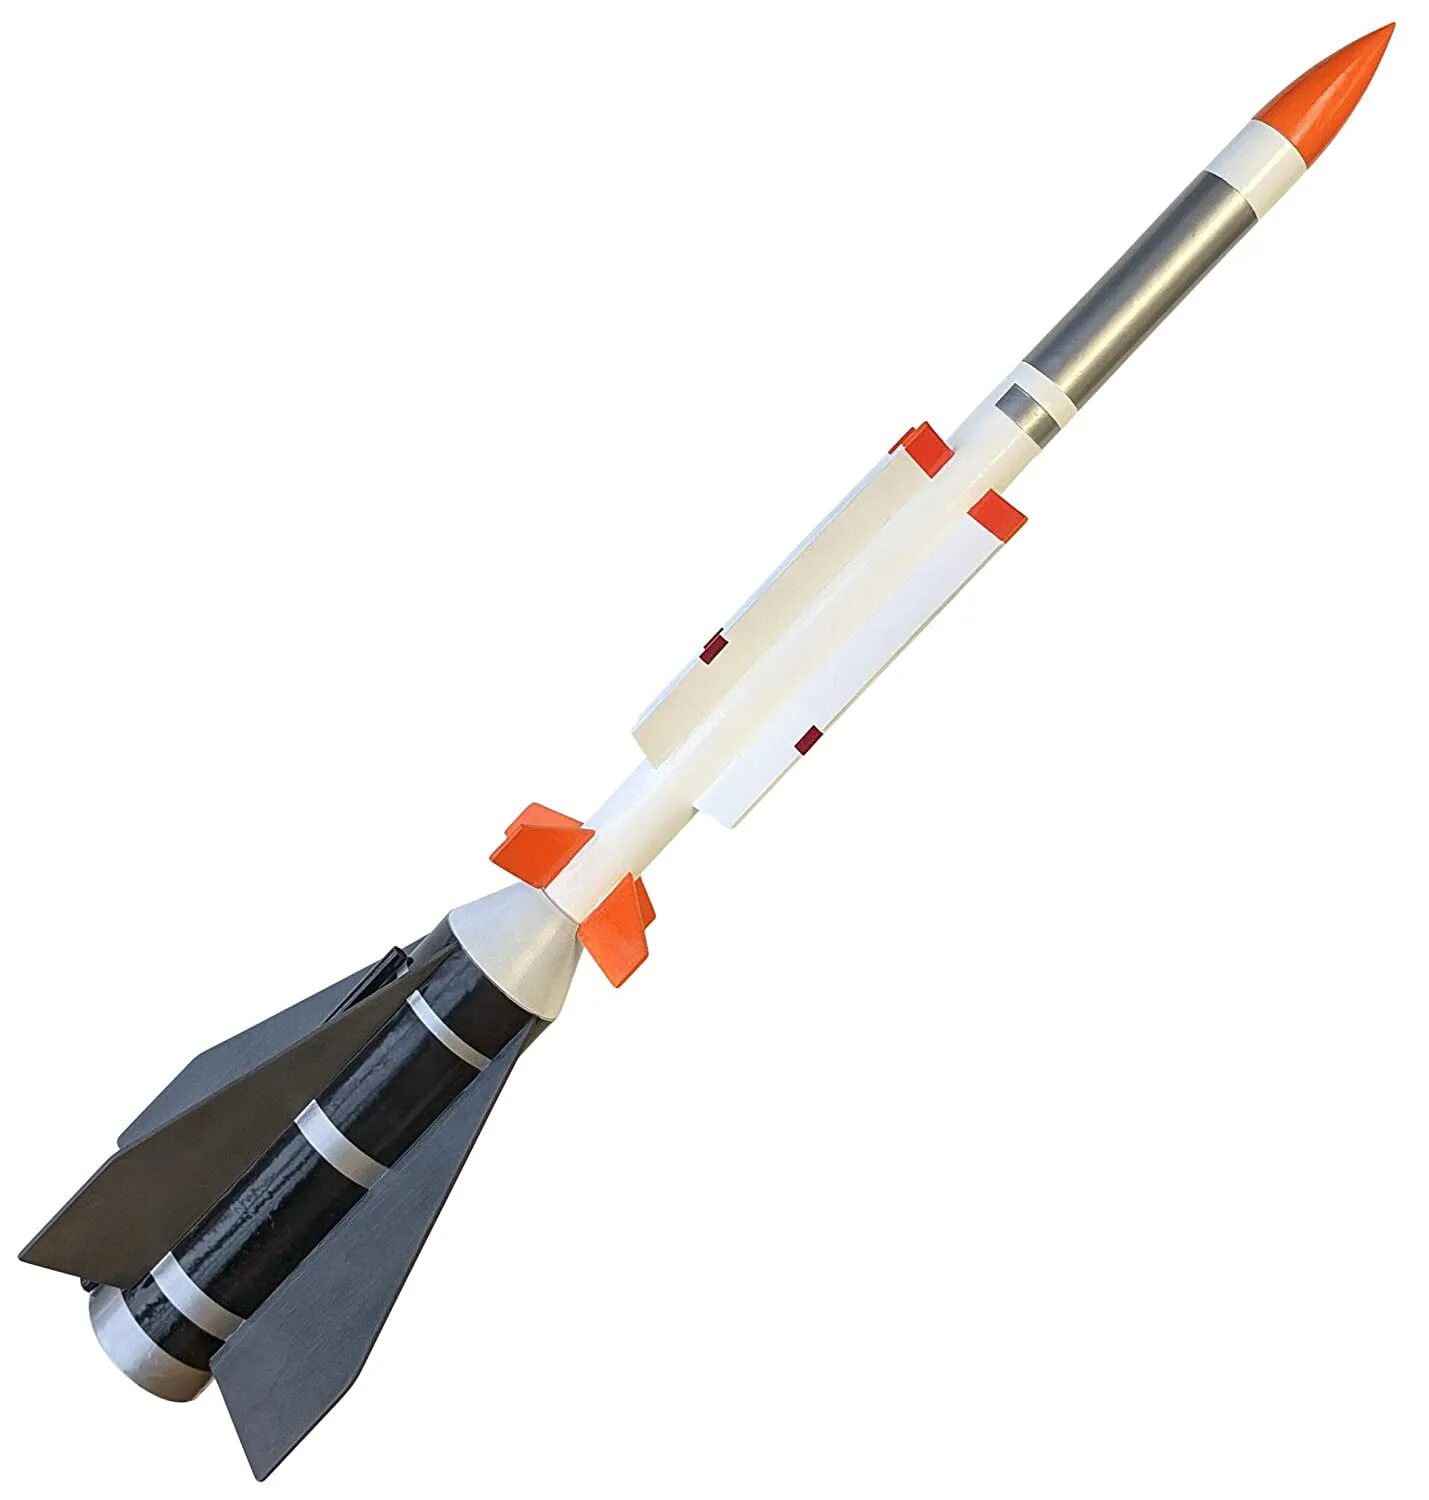 Aster 30 ракета. Aster 30 Missile. Aster 15. Aster ракета. Aster ЗРК.